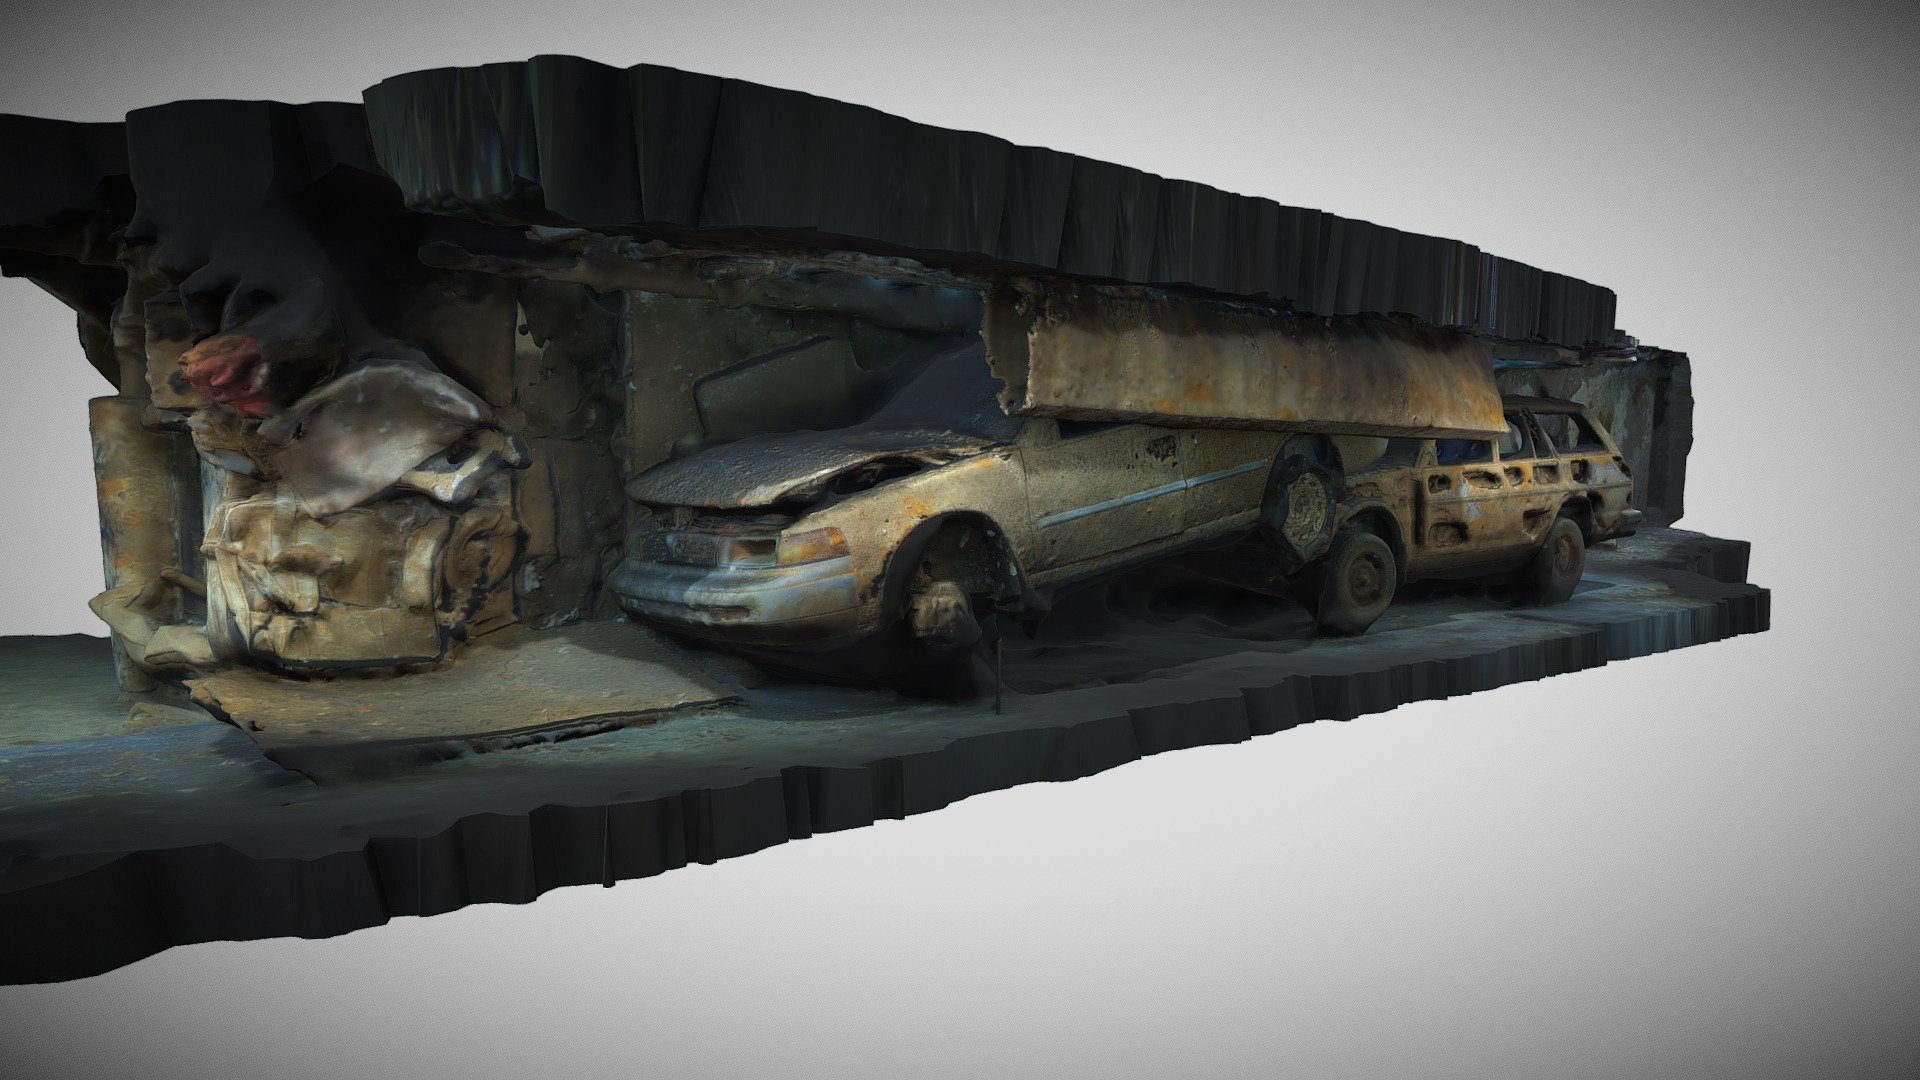 The Salem Express was an Egyptian ferry that sank in the Red Sea near Safaga in 1991.
Thre are these two cars on the car deck in an very narrow area 3d model